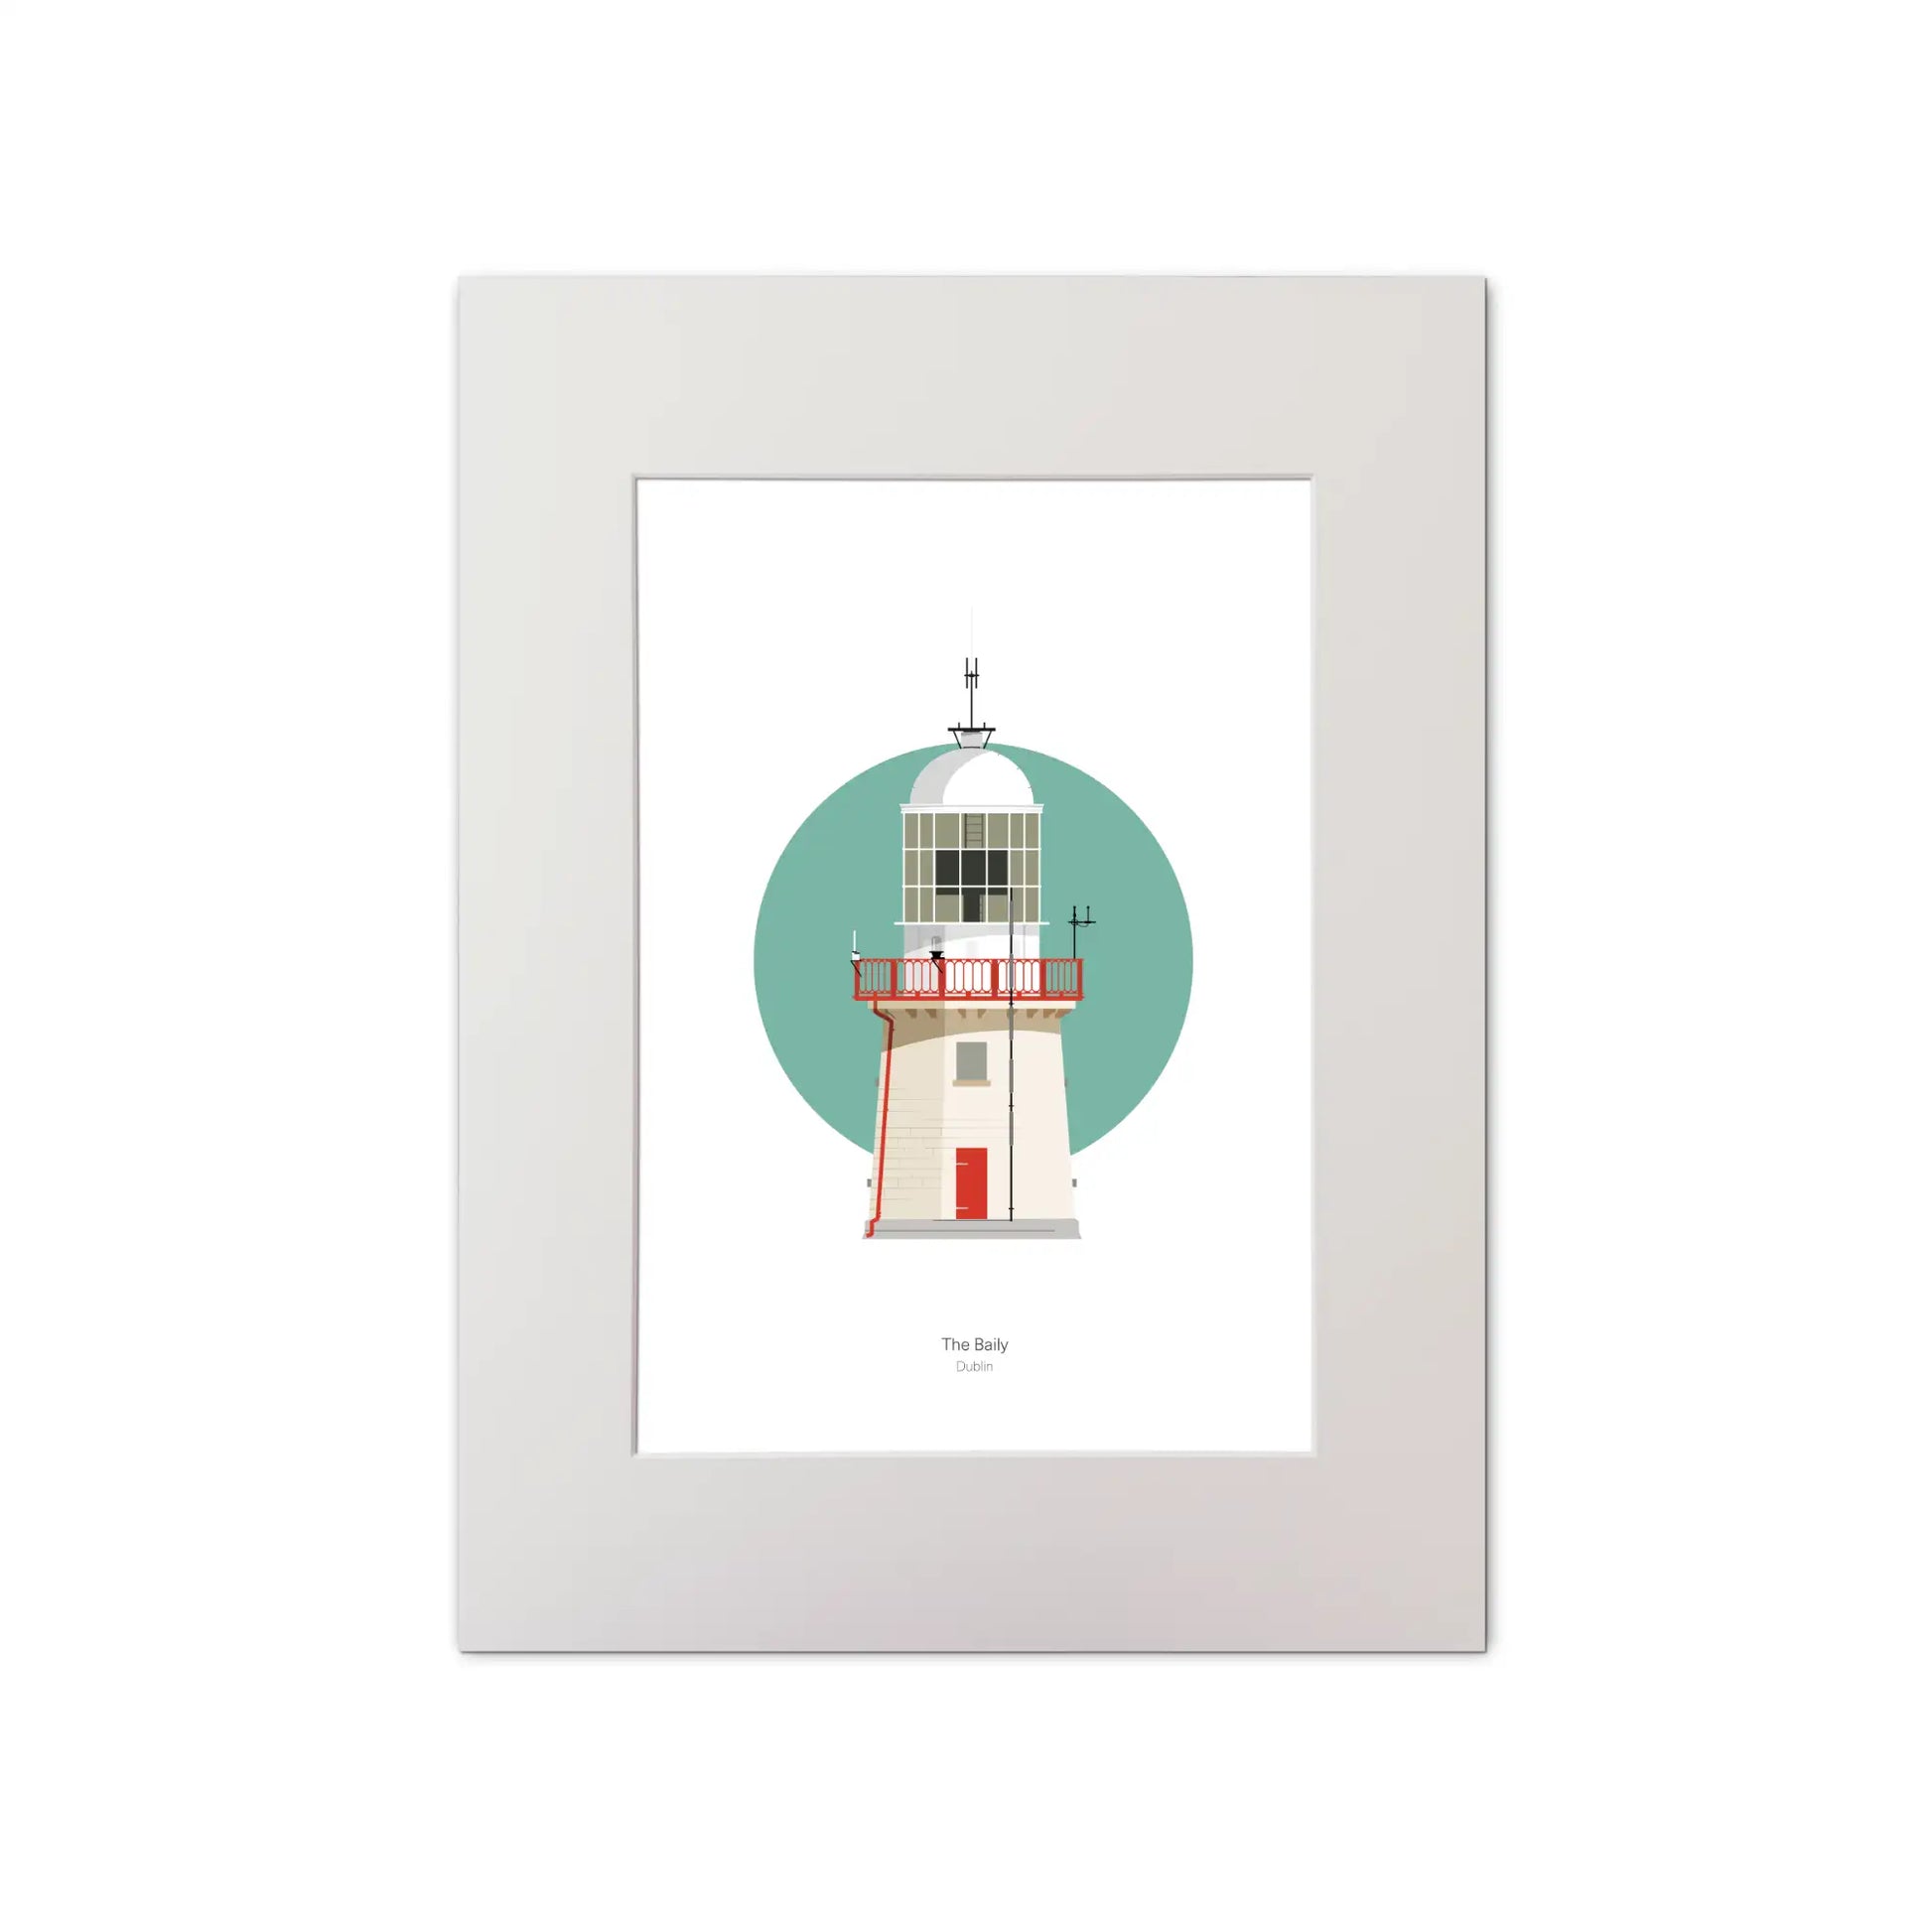 Illustration of The Baily lighthouse on a white background inside light blue square, mounted and measuring 30x40cm.